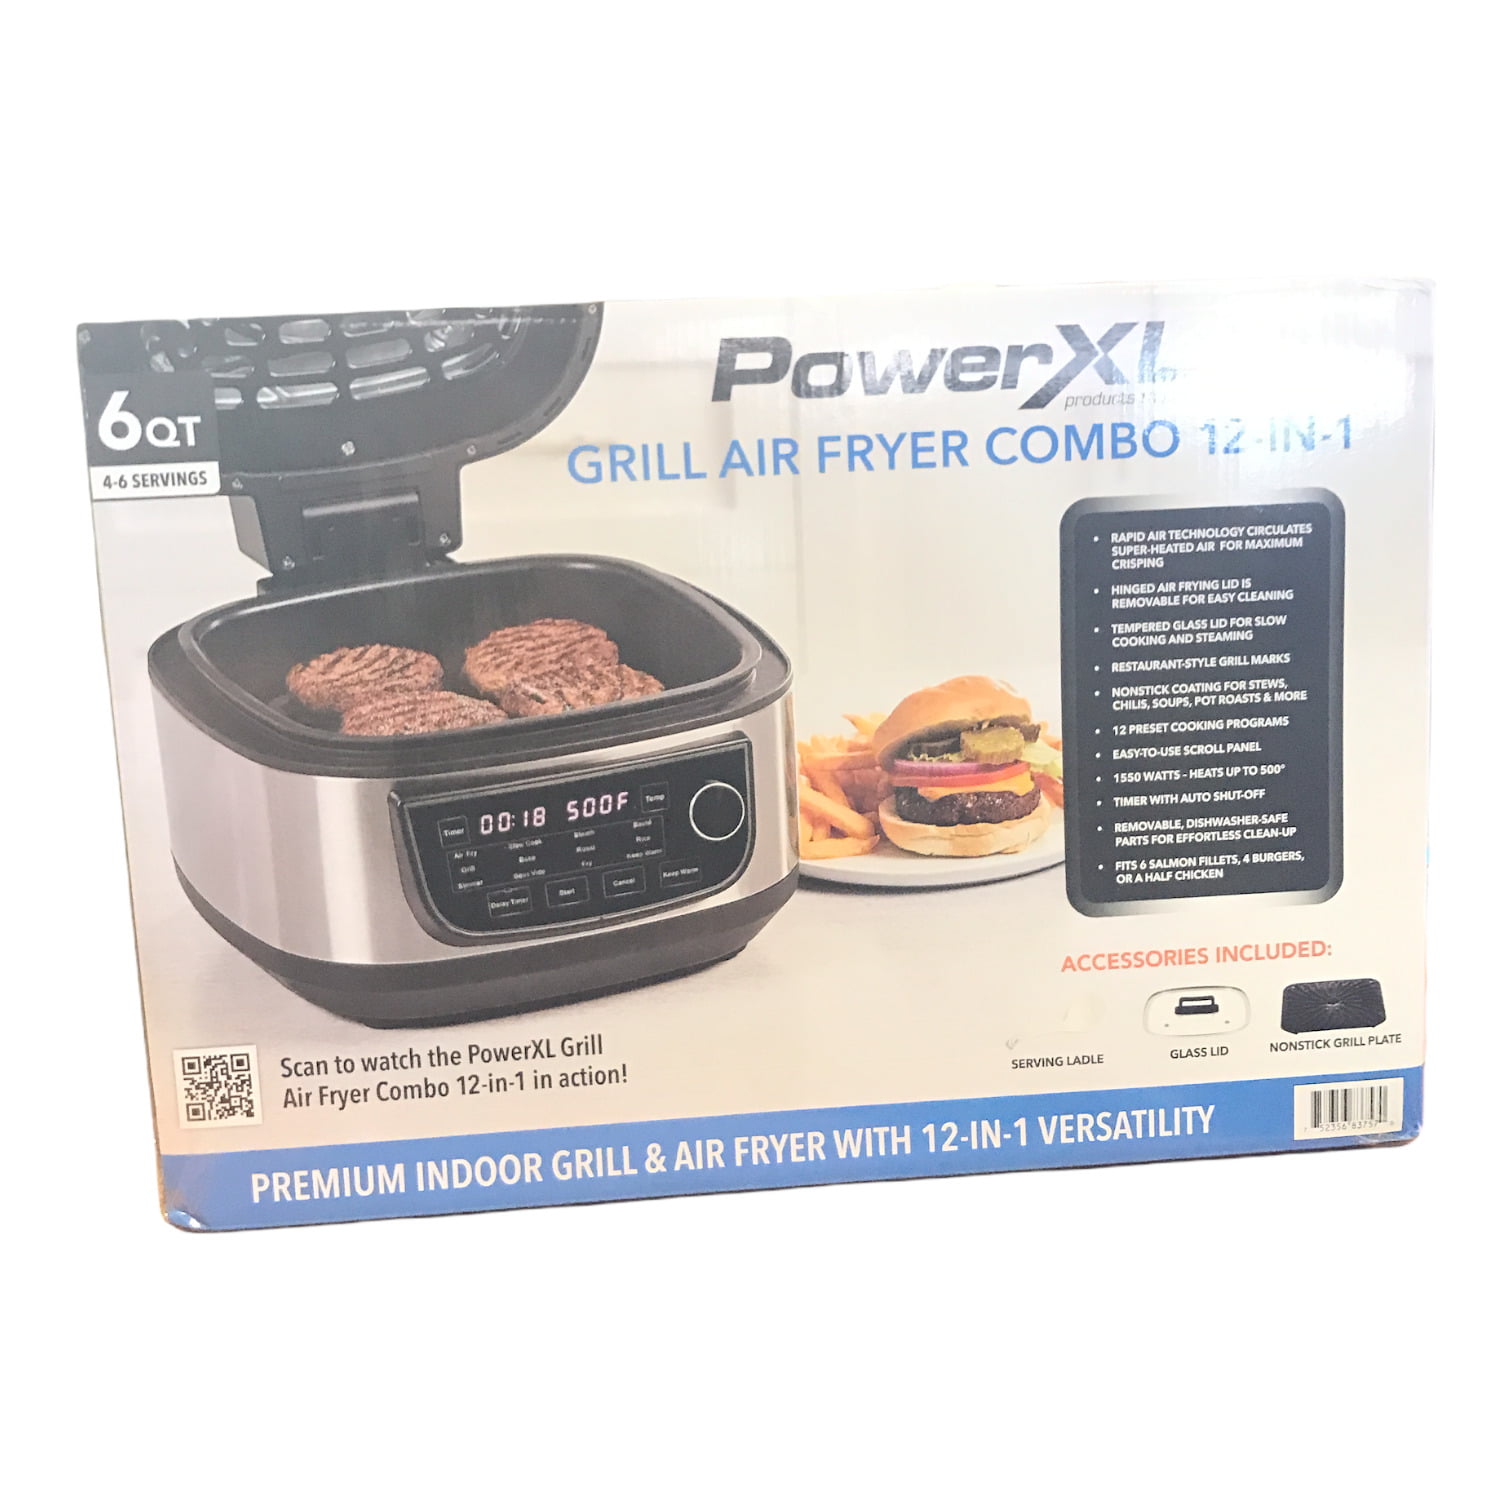 PowerXL Grill and Air Fryer Combo 12-in-1 